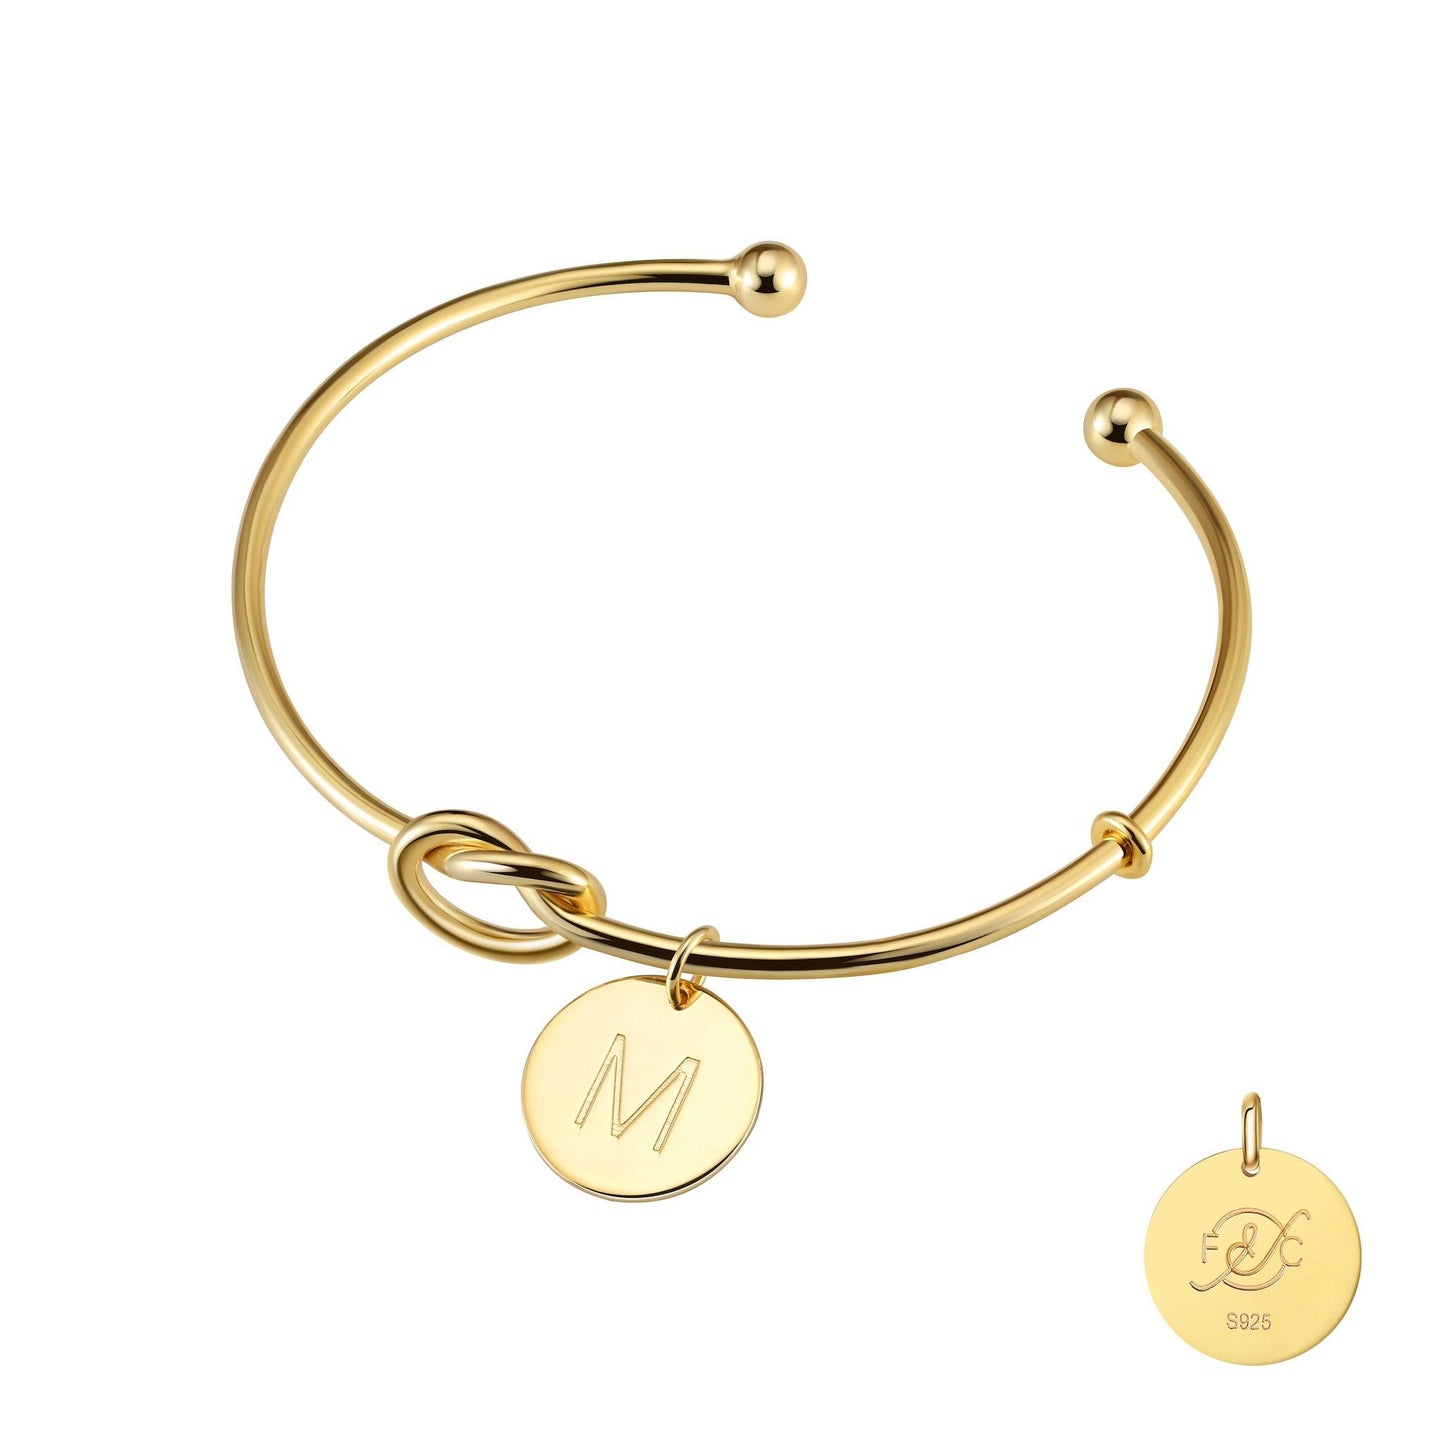 Knot Initial Bracelet in sterling silver with a gold finish includes an initial letter charm for added jewelry personalization.